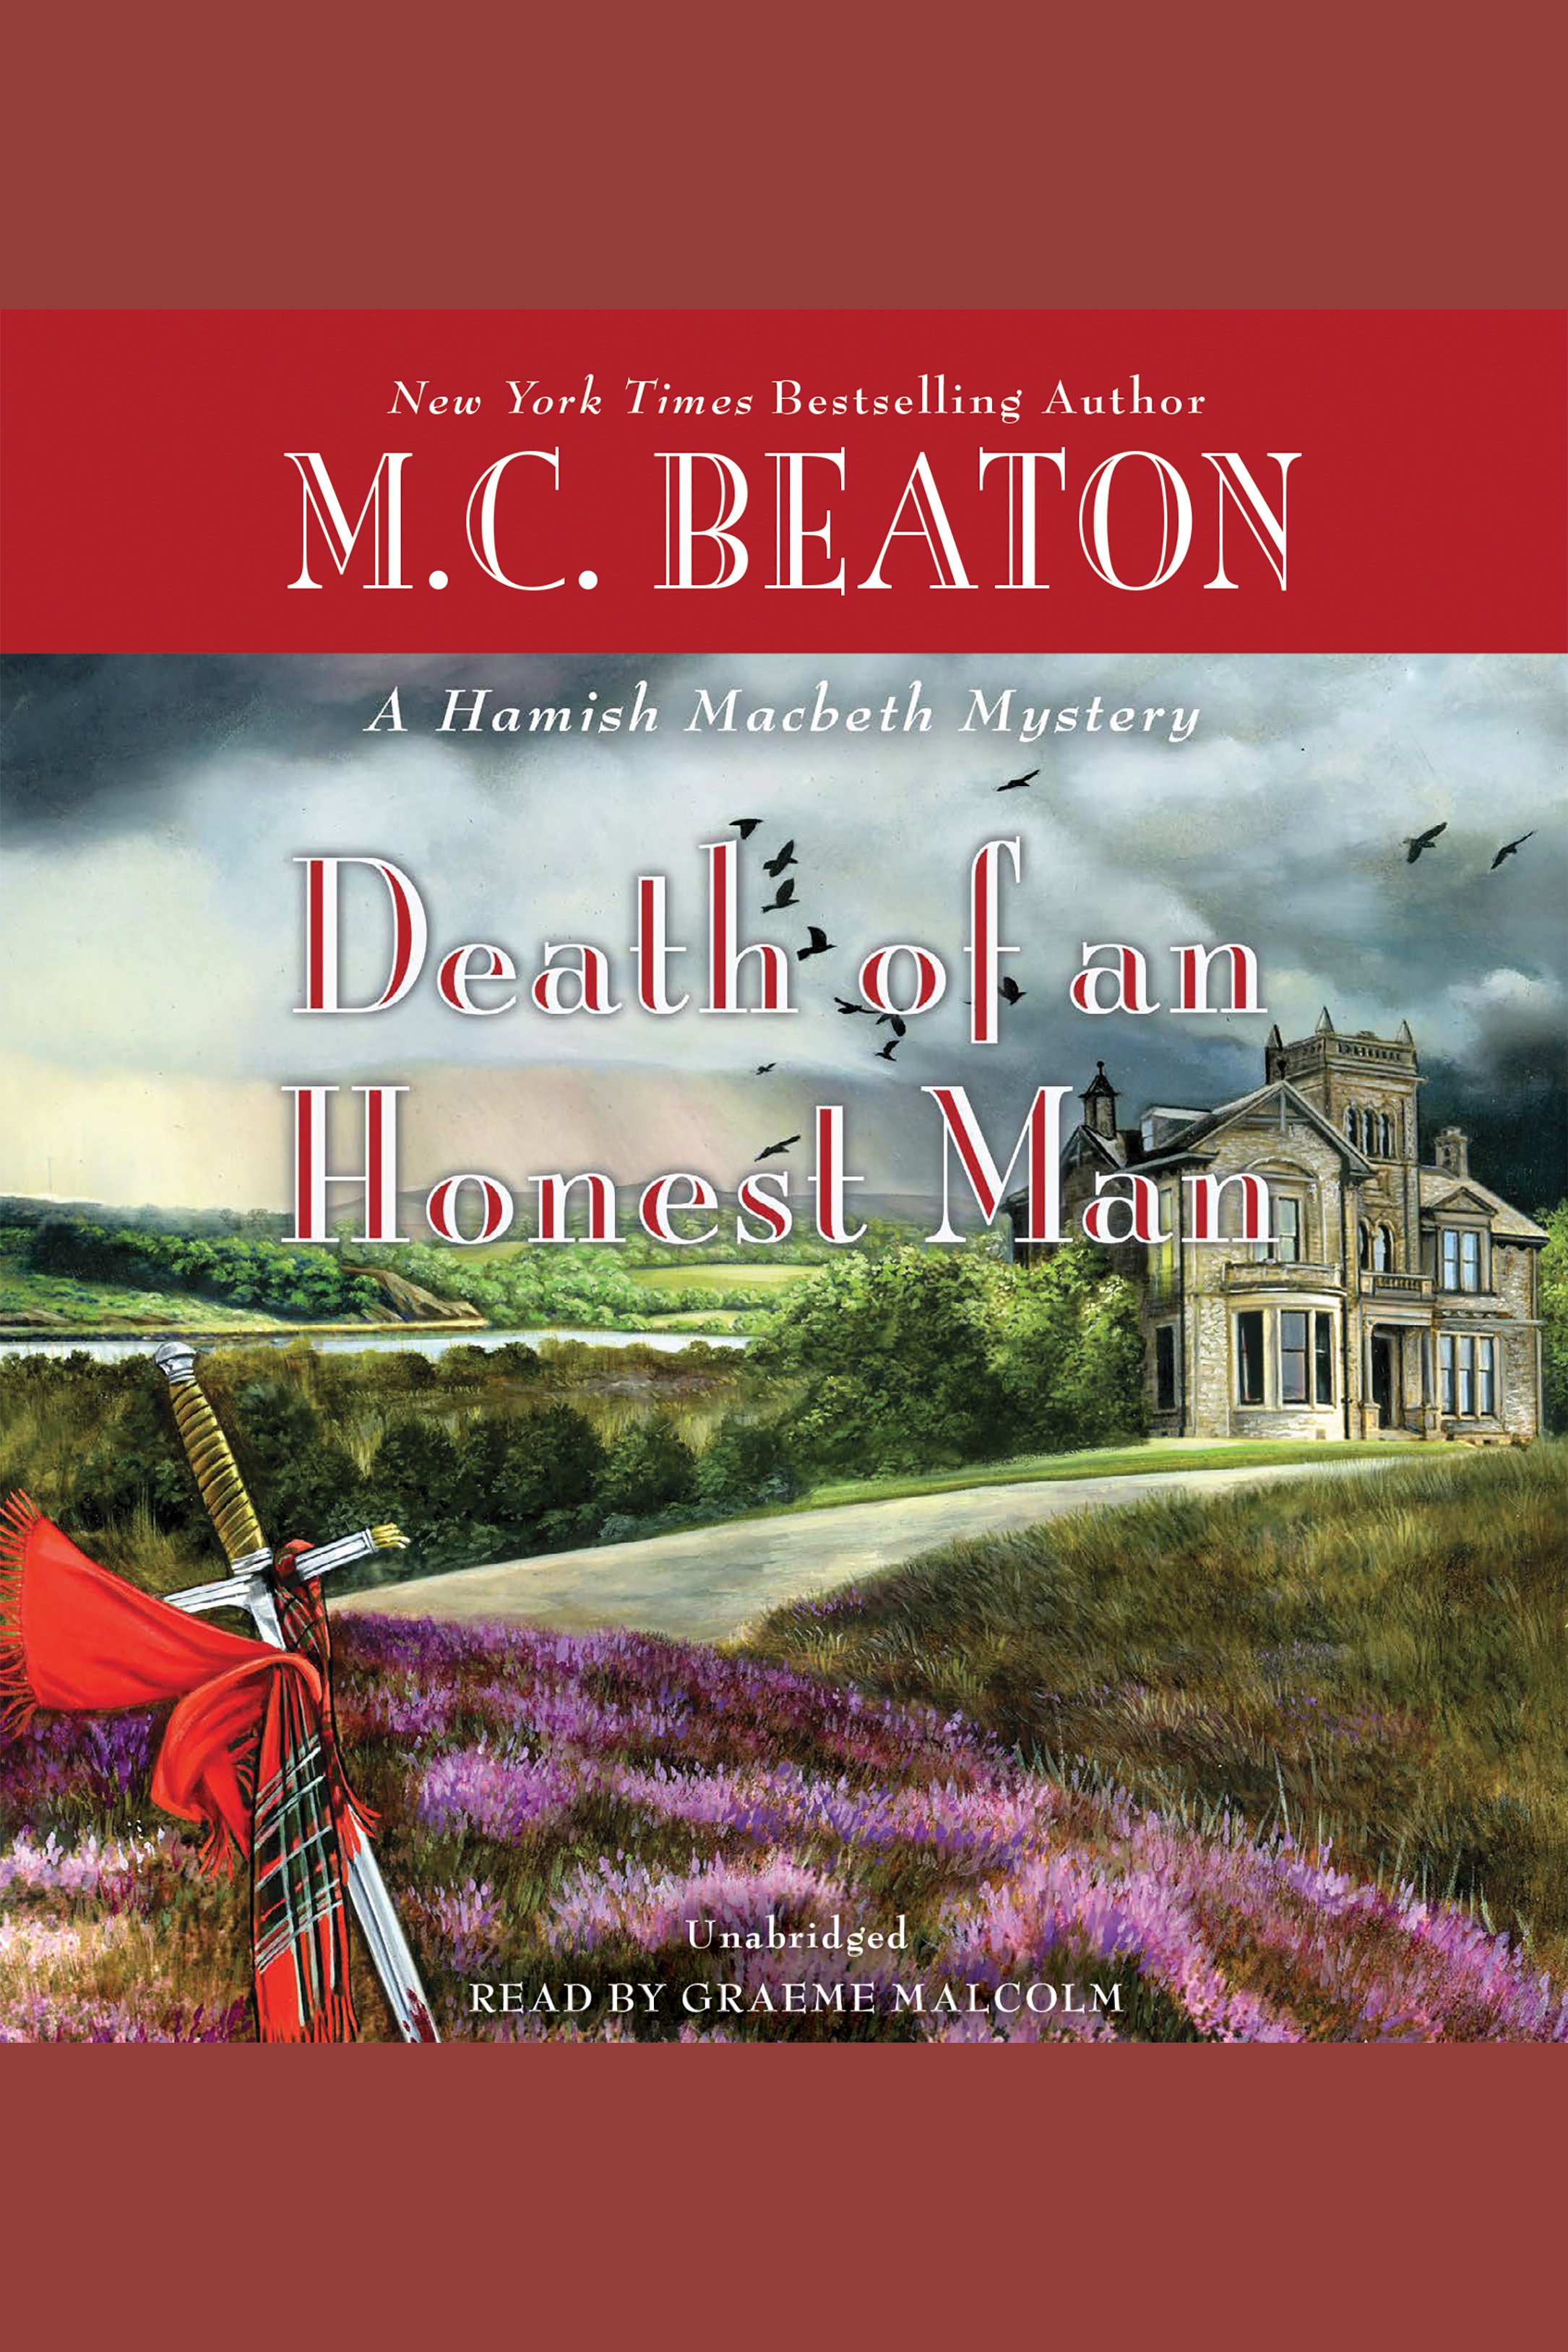 Death of an honest man cover image